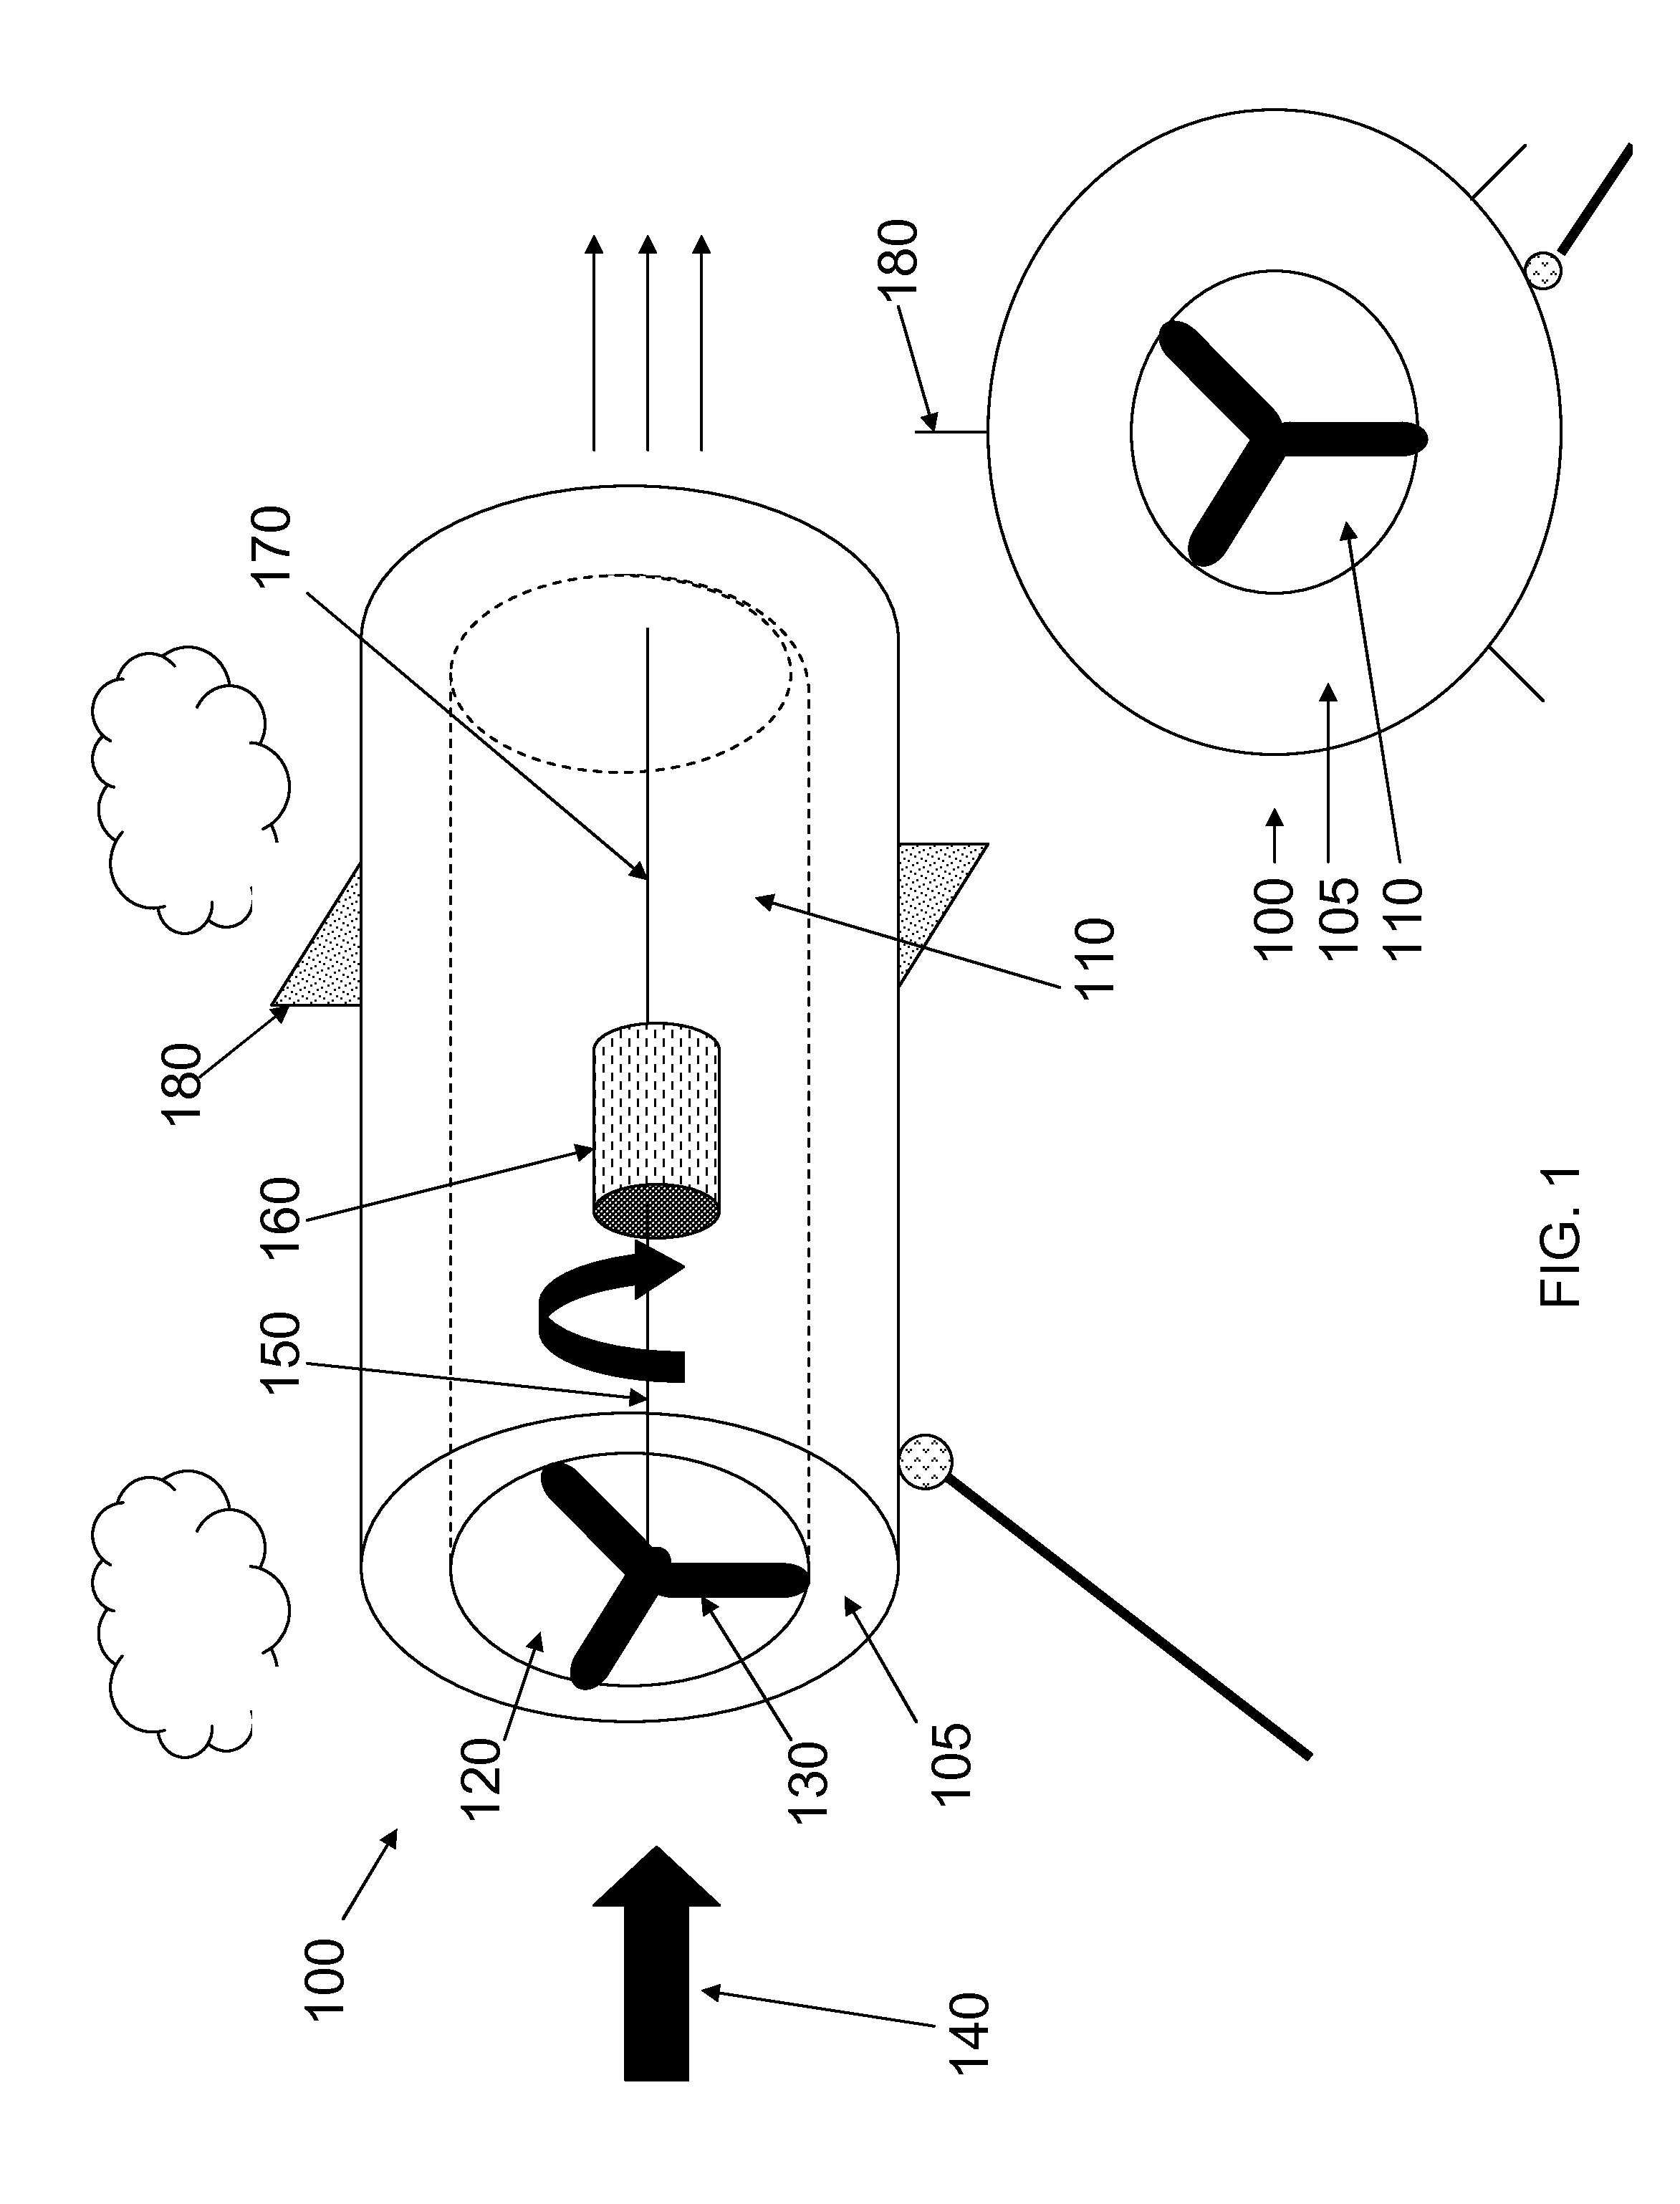 Methods and devices for generating electricity from high altitude wind sources